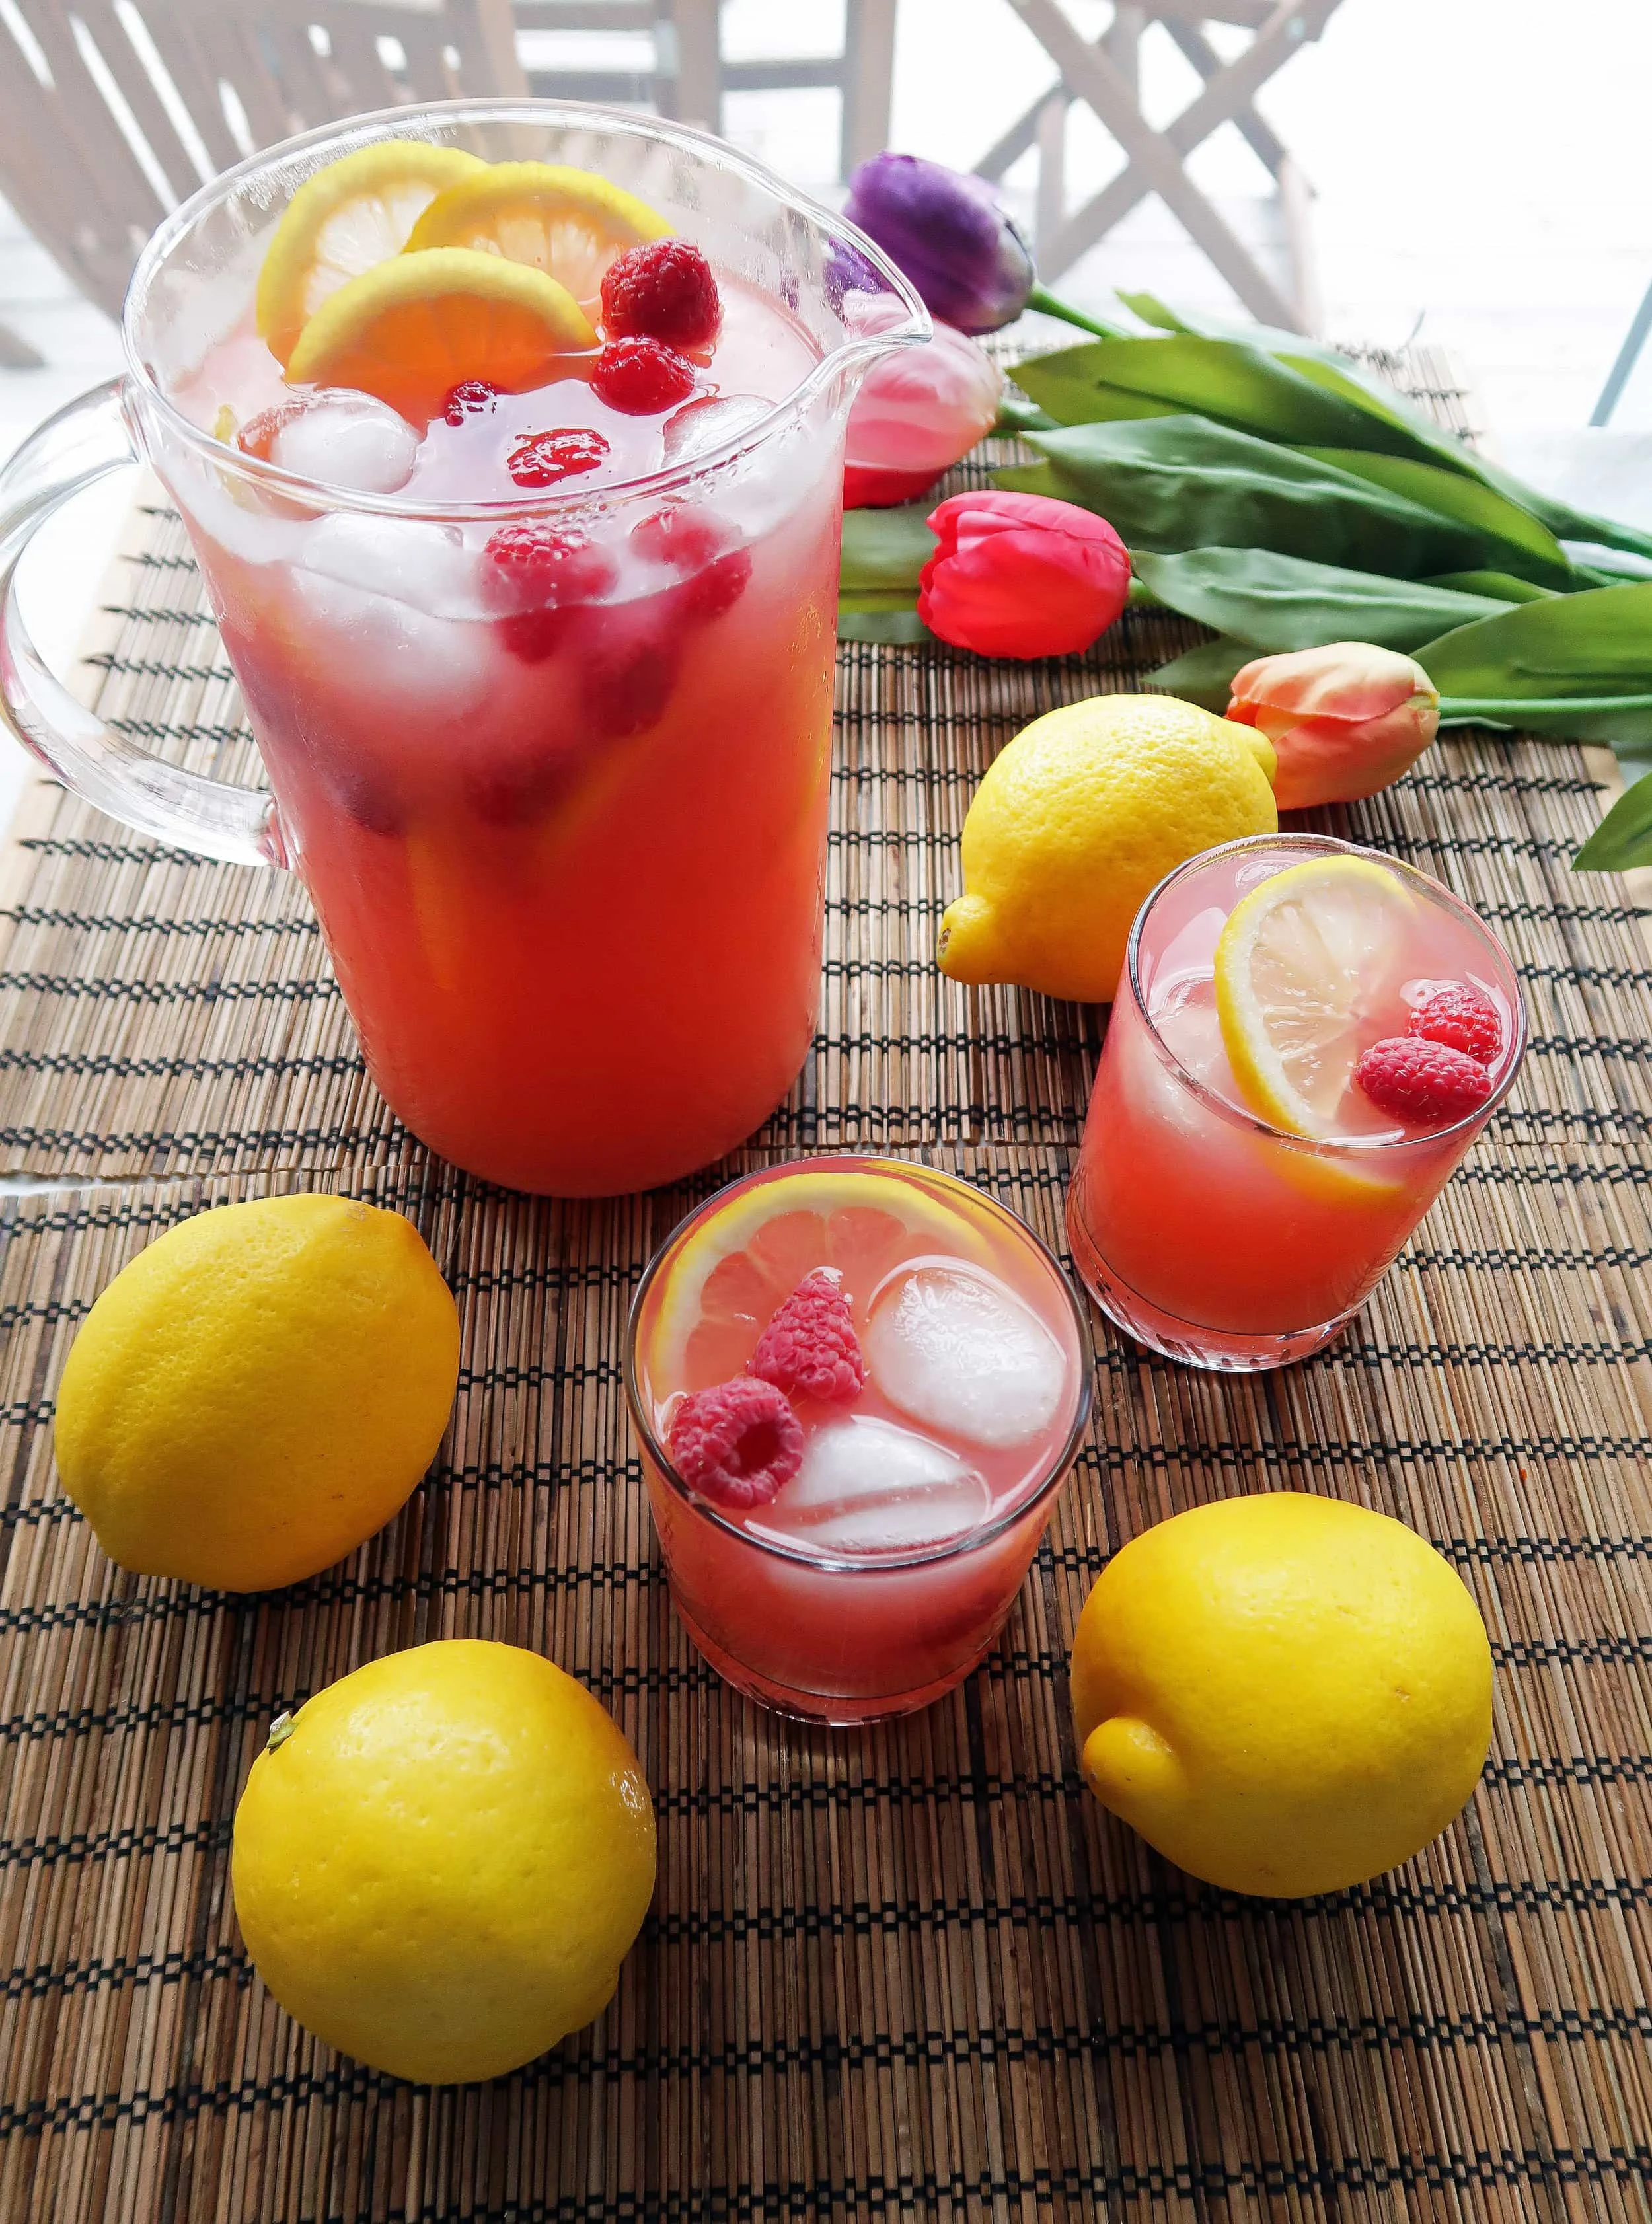 Two glasses and a pitcher full of homemade Raspberry Green Tea Lemonade with lemon slices and raspberry garnish; whole lemons around them.